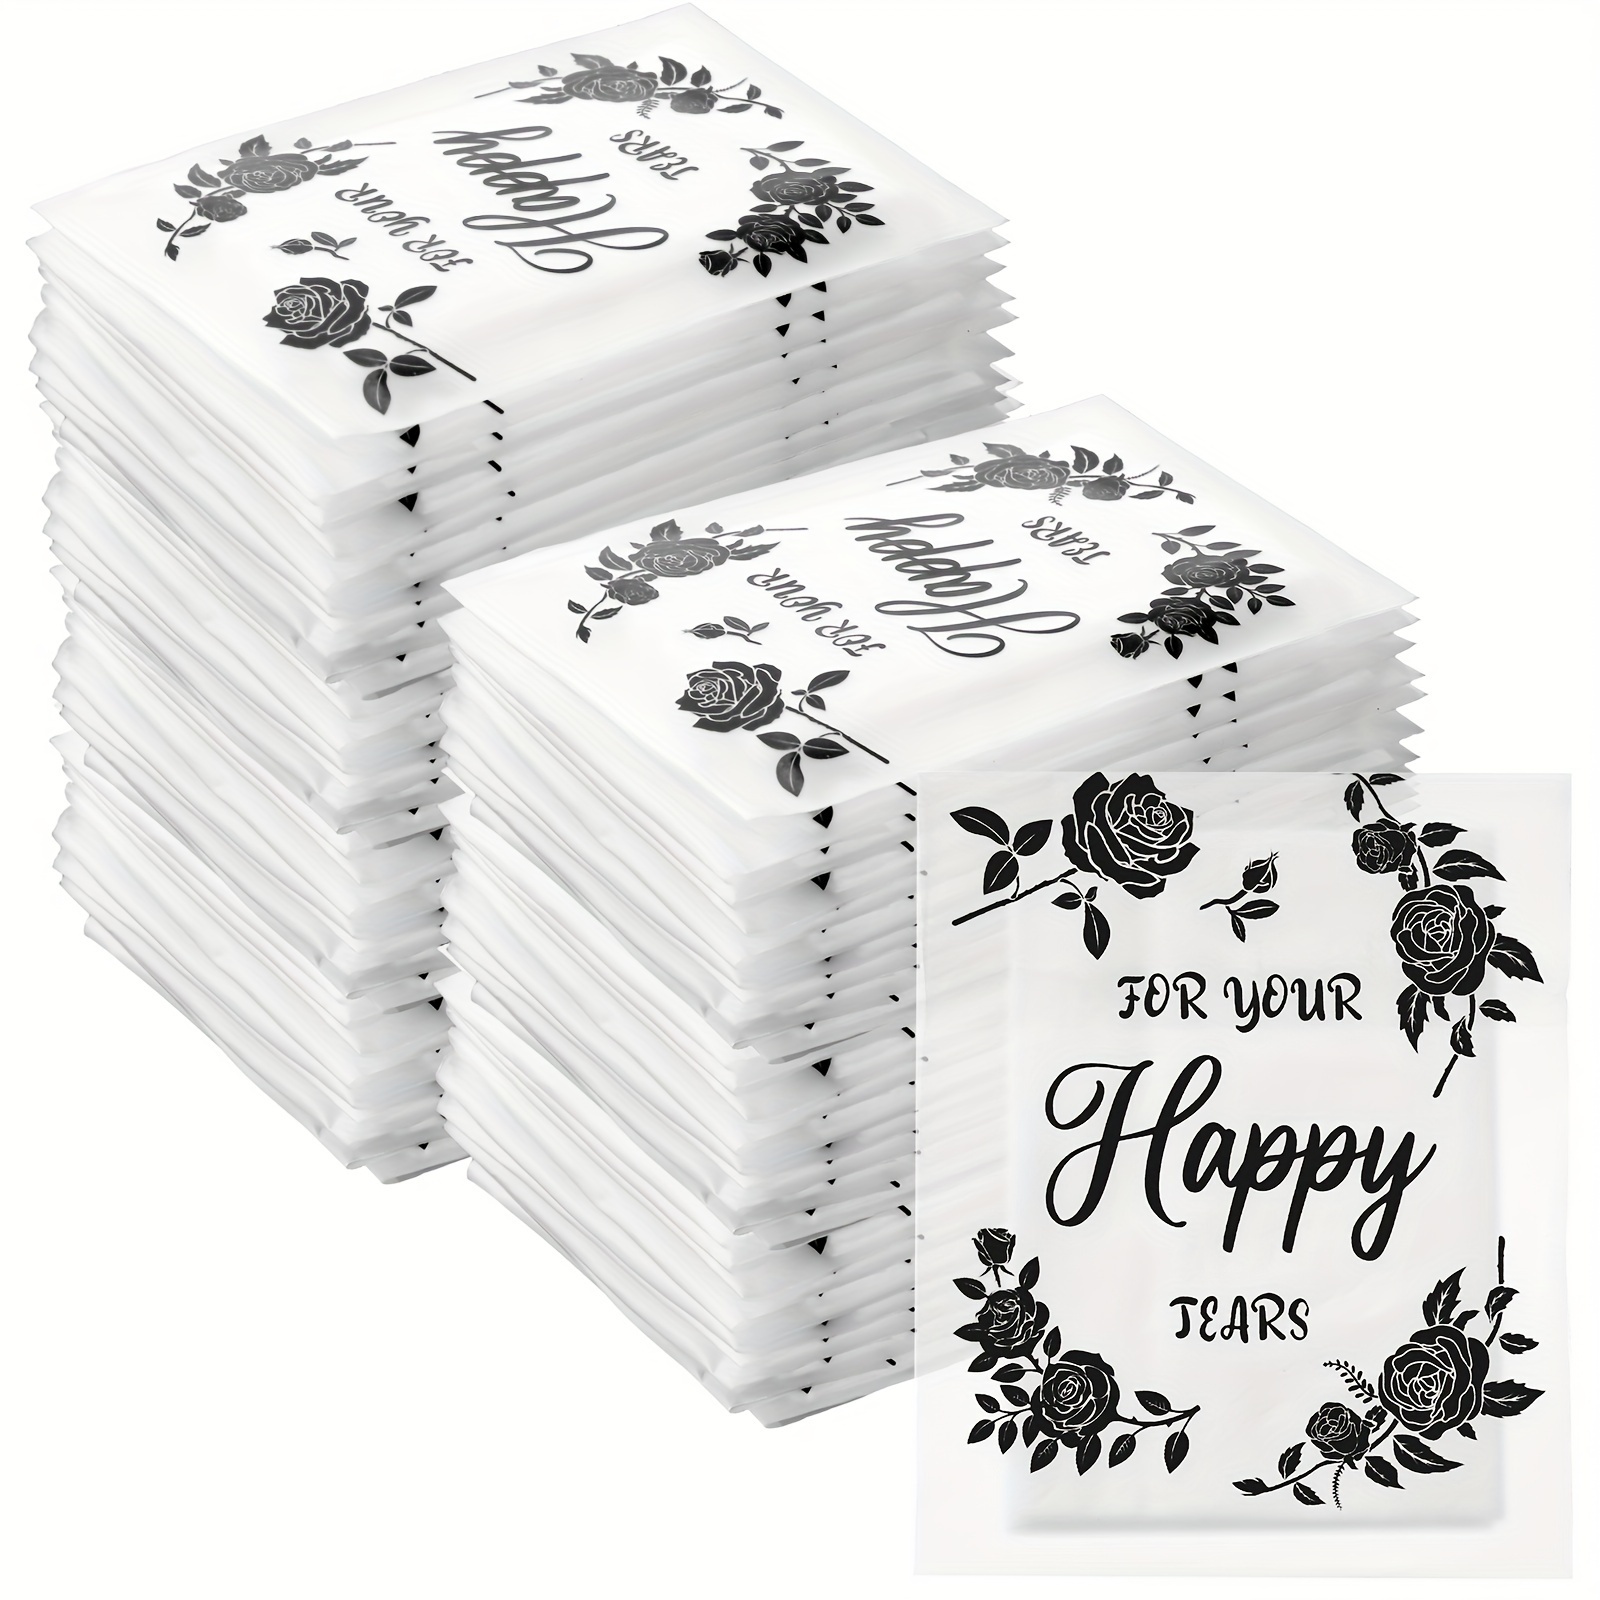 150pcs Wedding Tissues Packs For Guests, Individual Tissue Packs 3 Ply Happy Tears Tissue Packs For Wedding, Facial Tissues, Wedding Tissues Travel Si